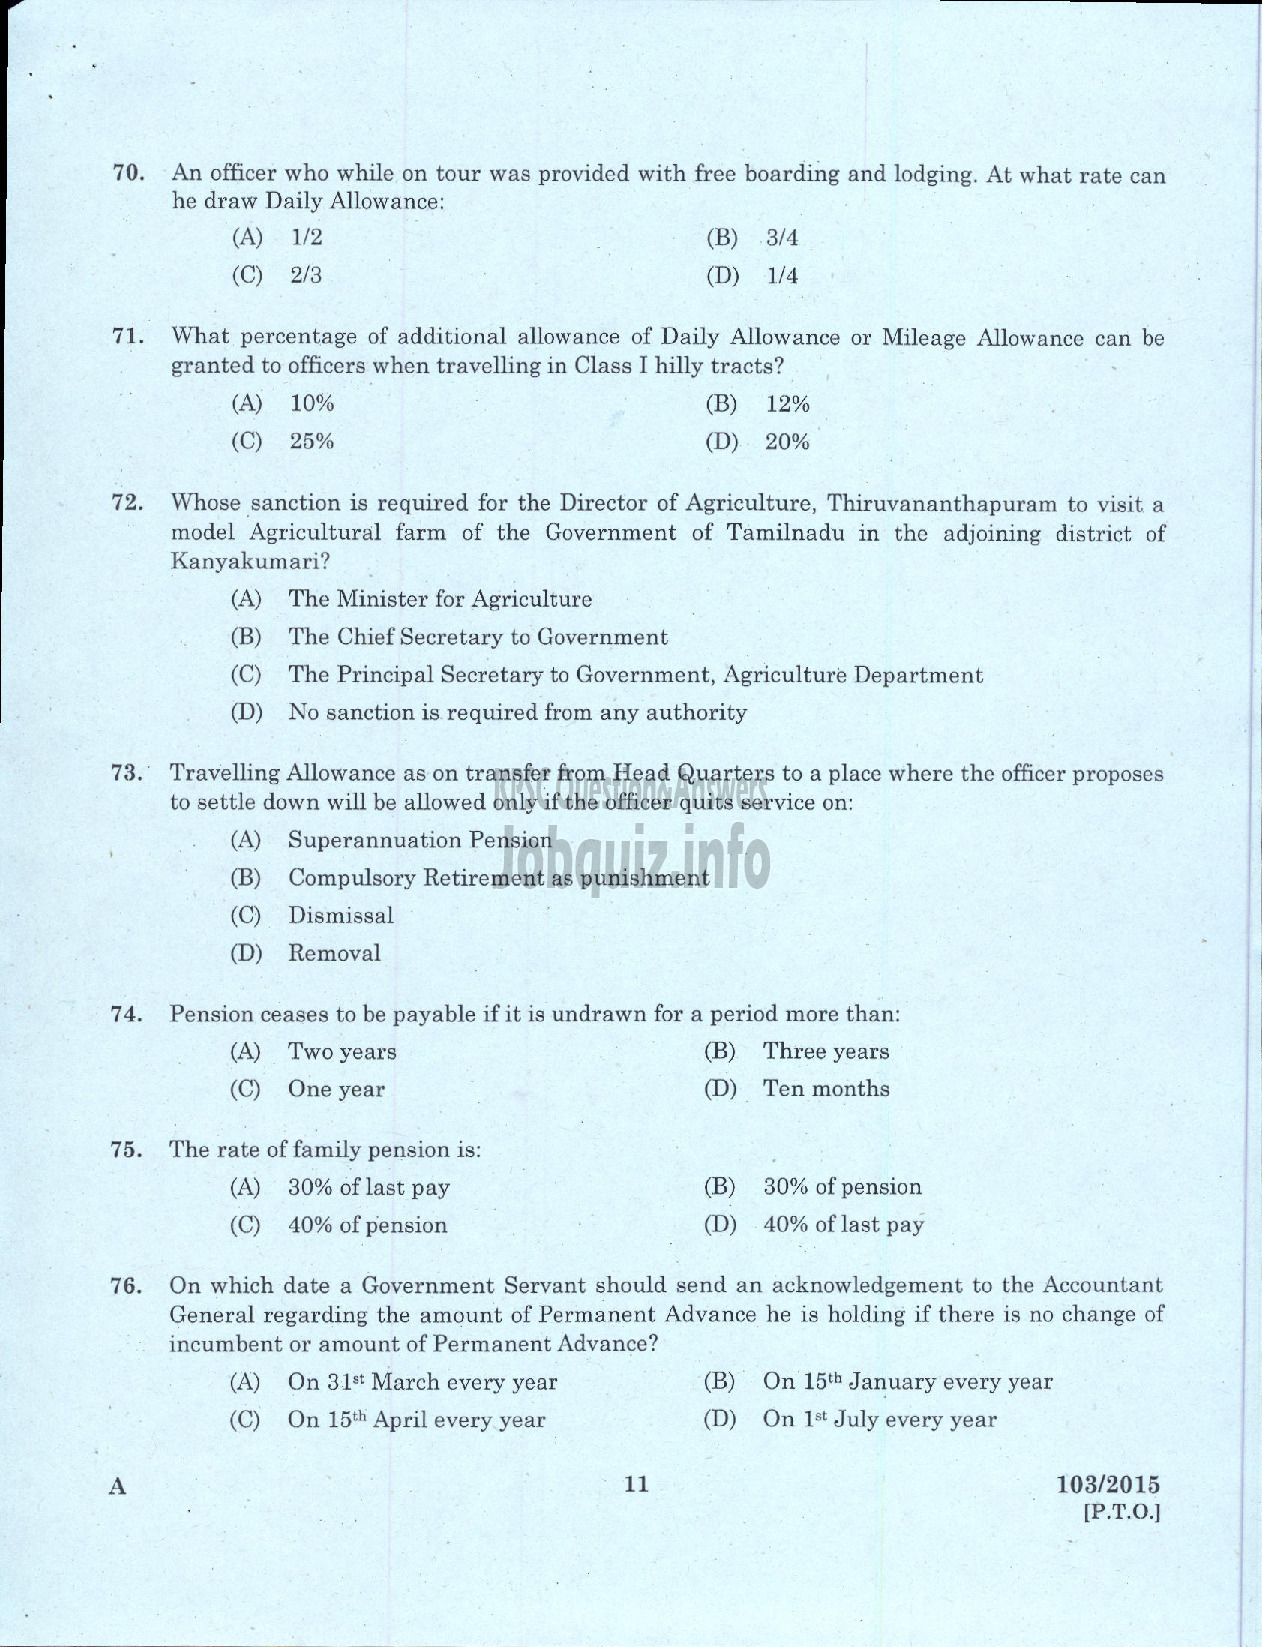 Kerala PSC Question Paper - ADMINISTRATIVE OFFICER BY TRANSFER INTERNAL KSRTC-9